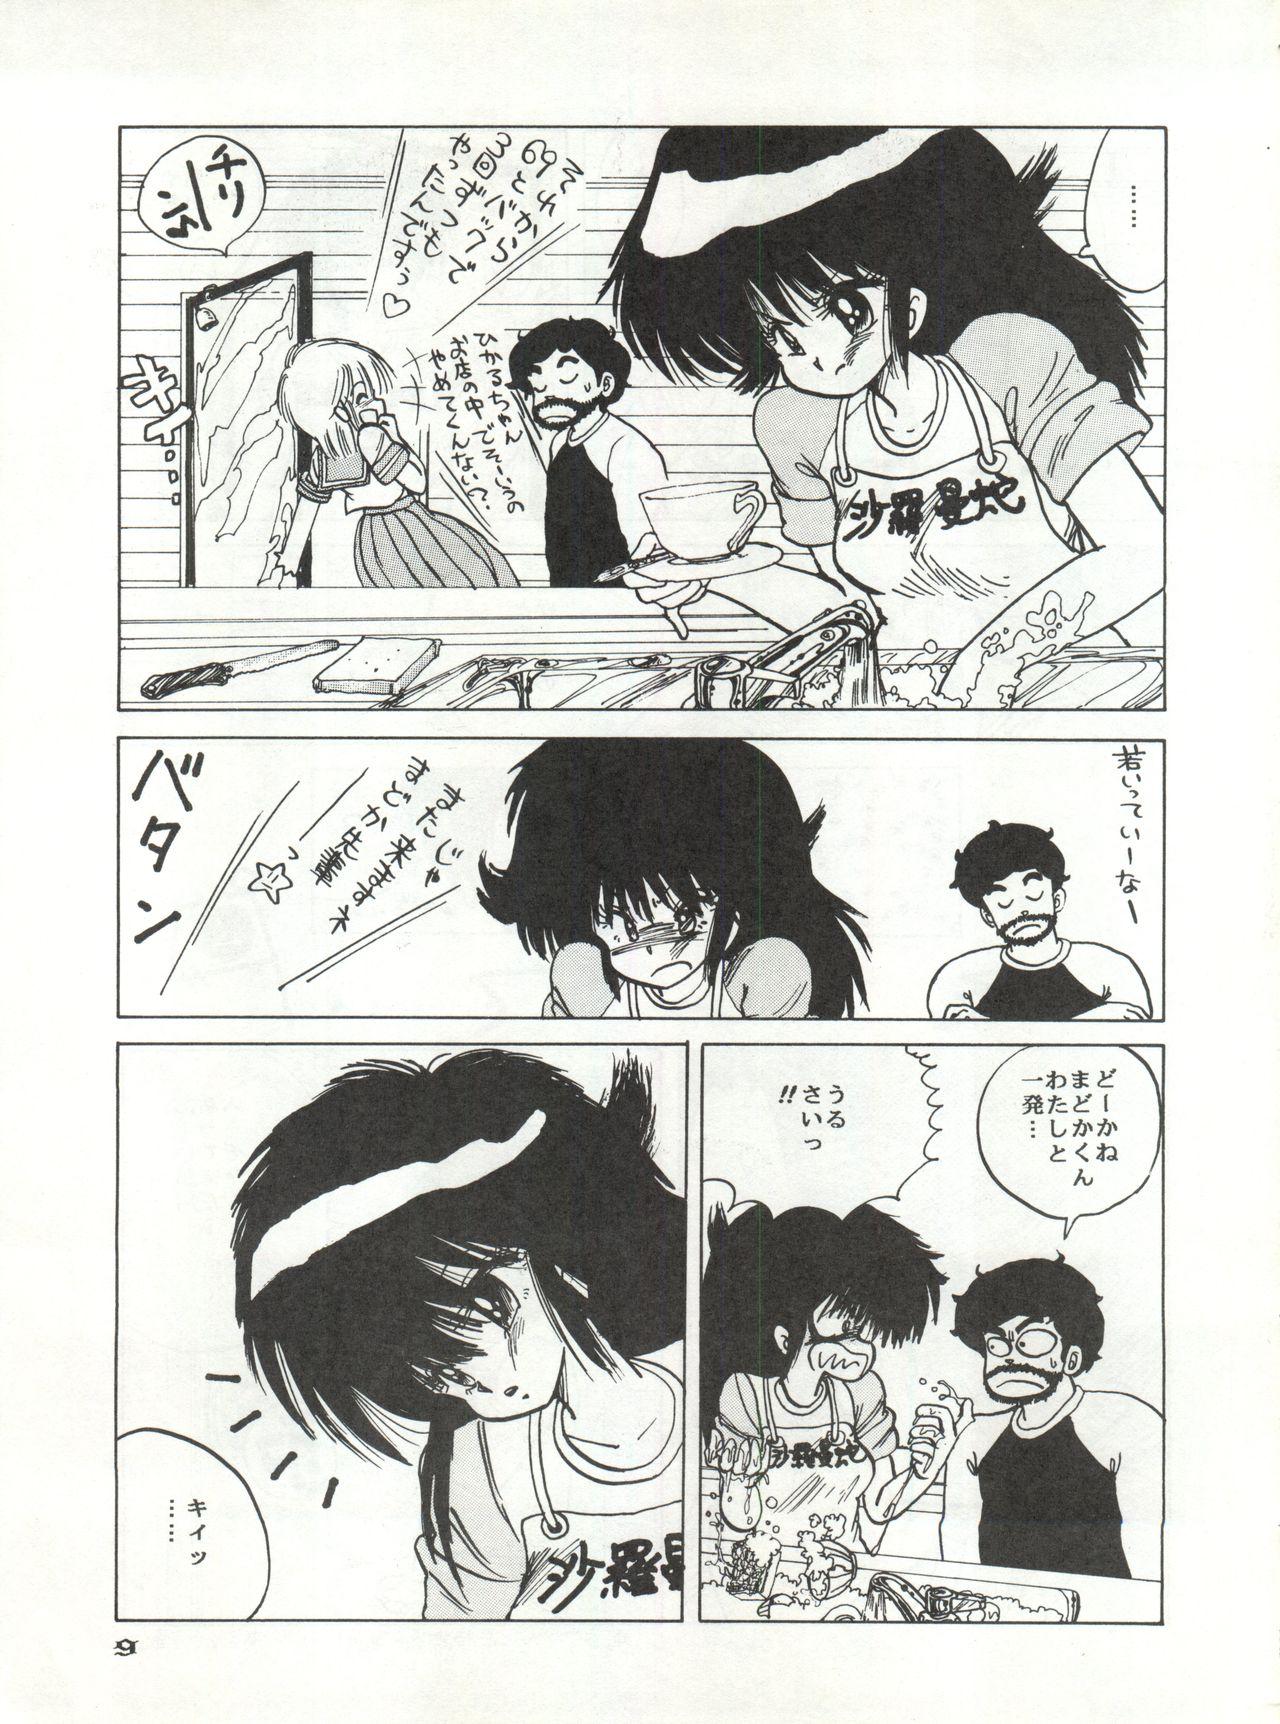 Licking Pussy New Carnival Night - Kimagure orange road Fit - Page 9